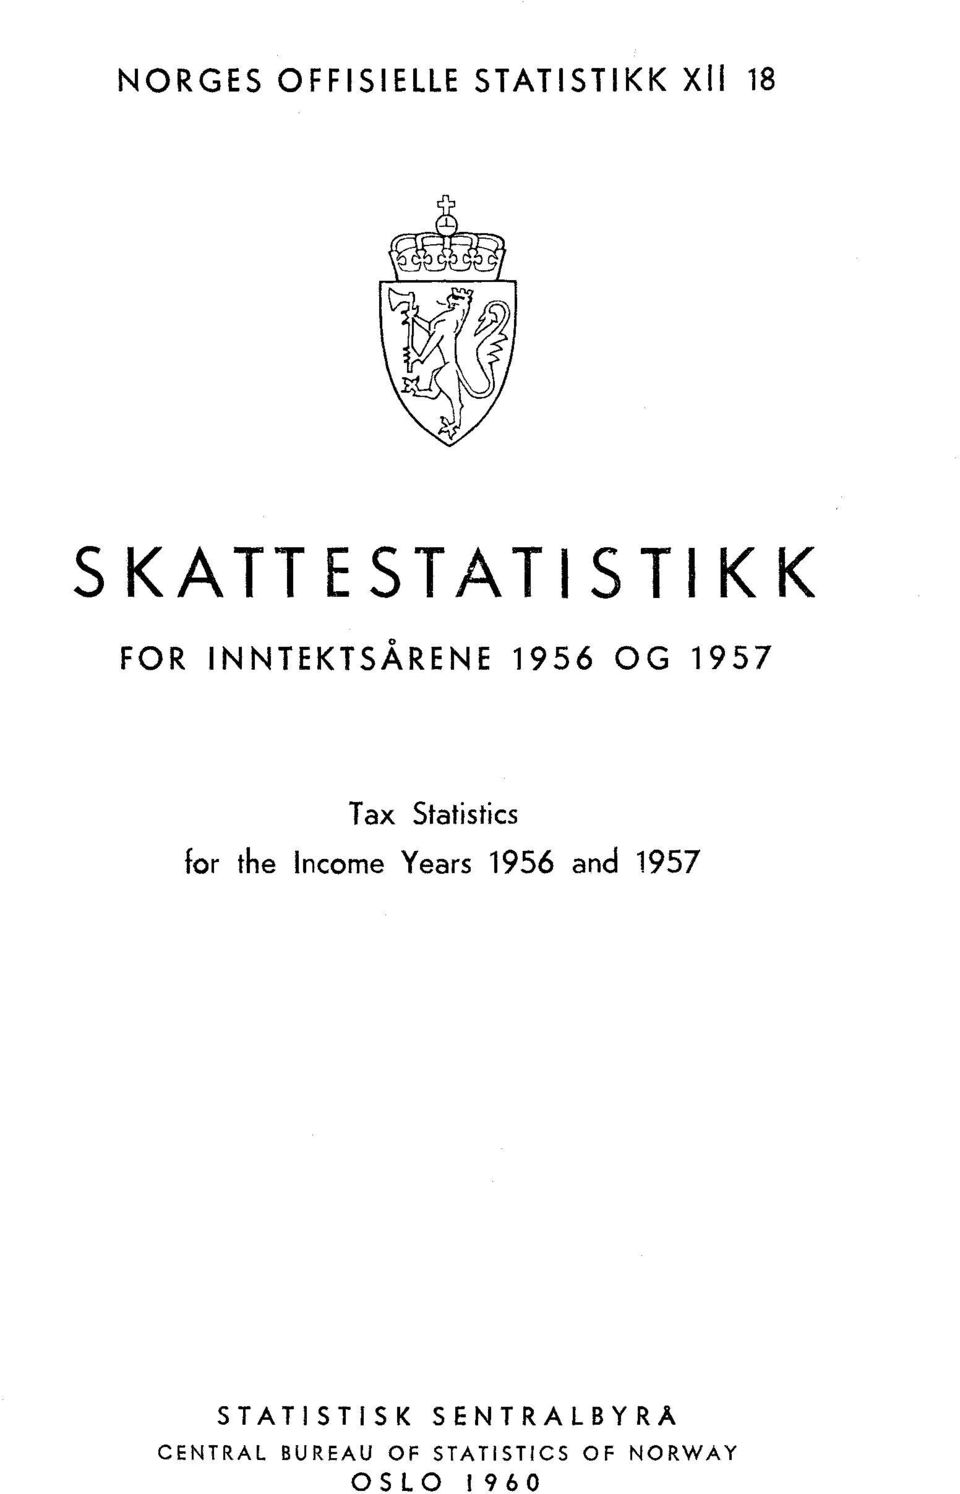 Statistics for the Income Years 956 and 957